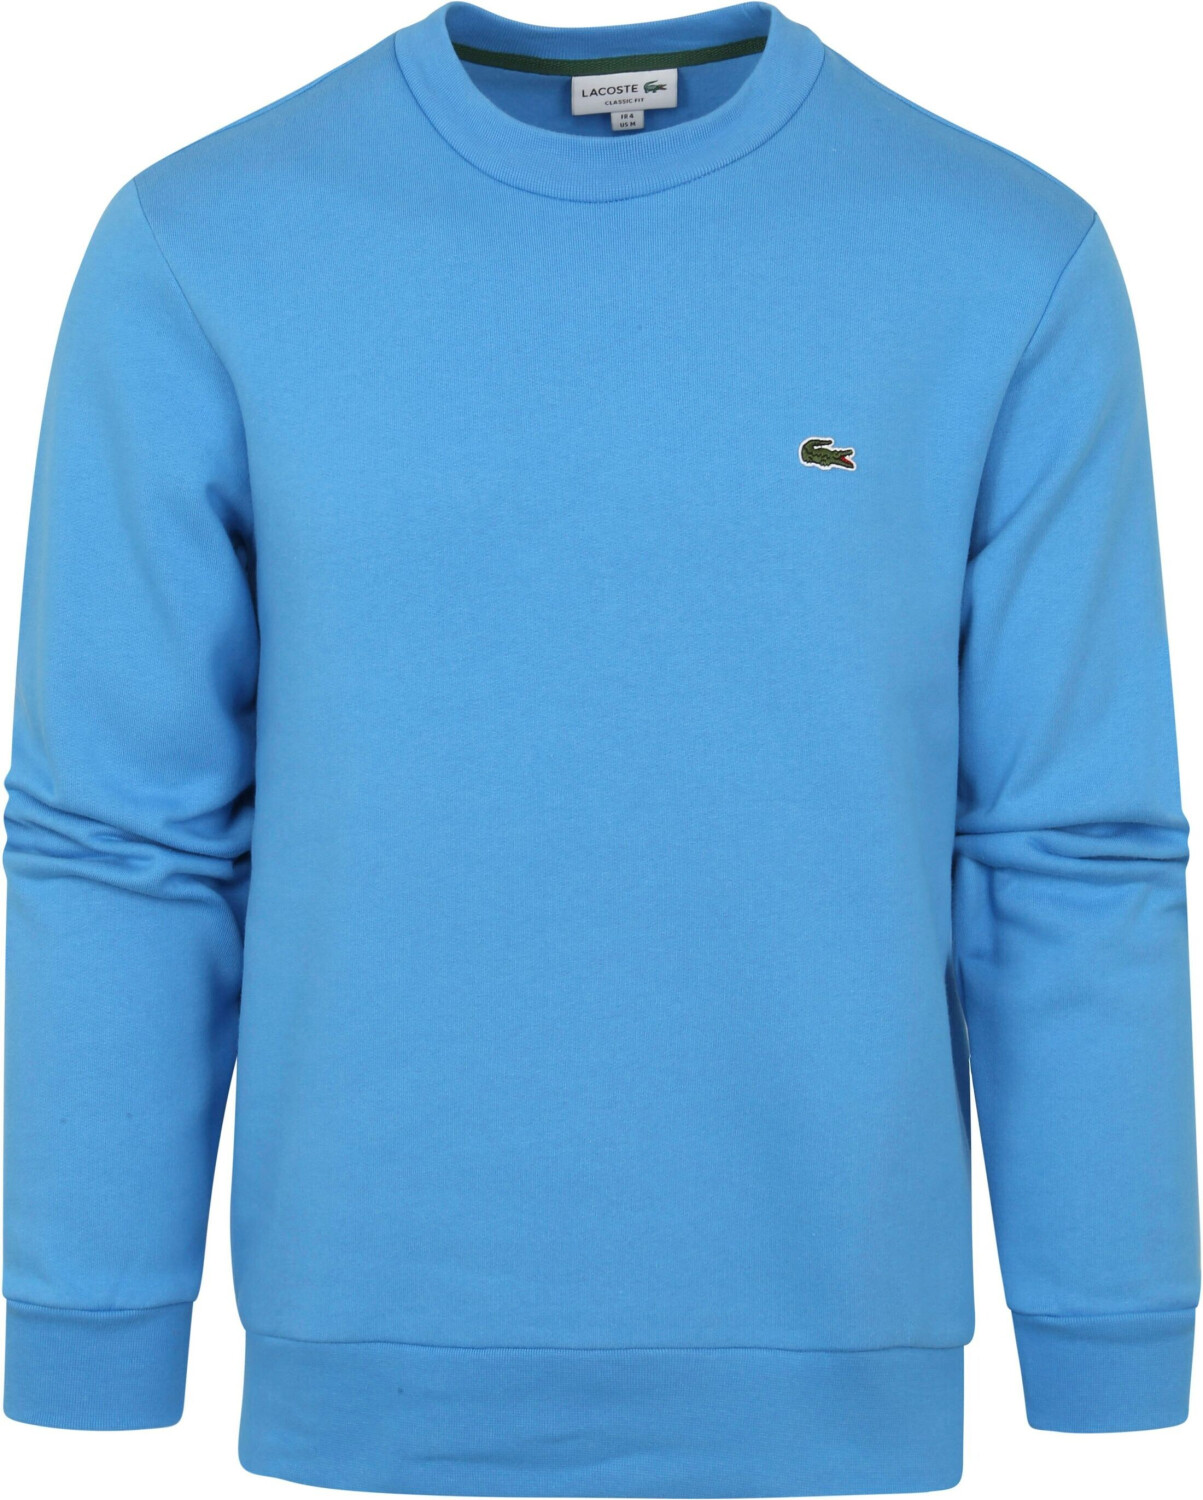 £68.00 Buy on (Today) blue Best – argentine Deals from (SH9608) Lacoste Sweatshirts